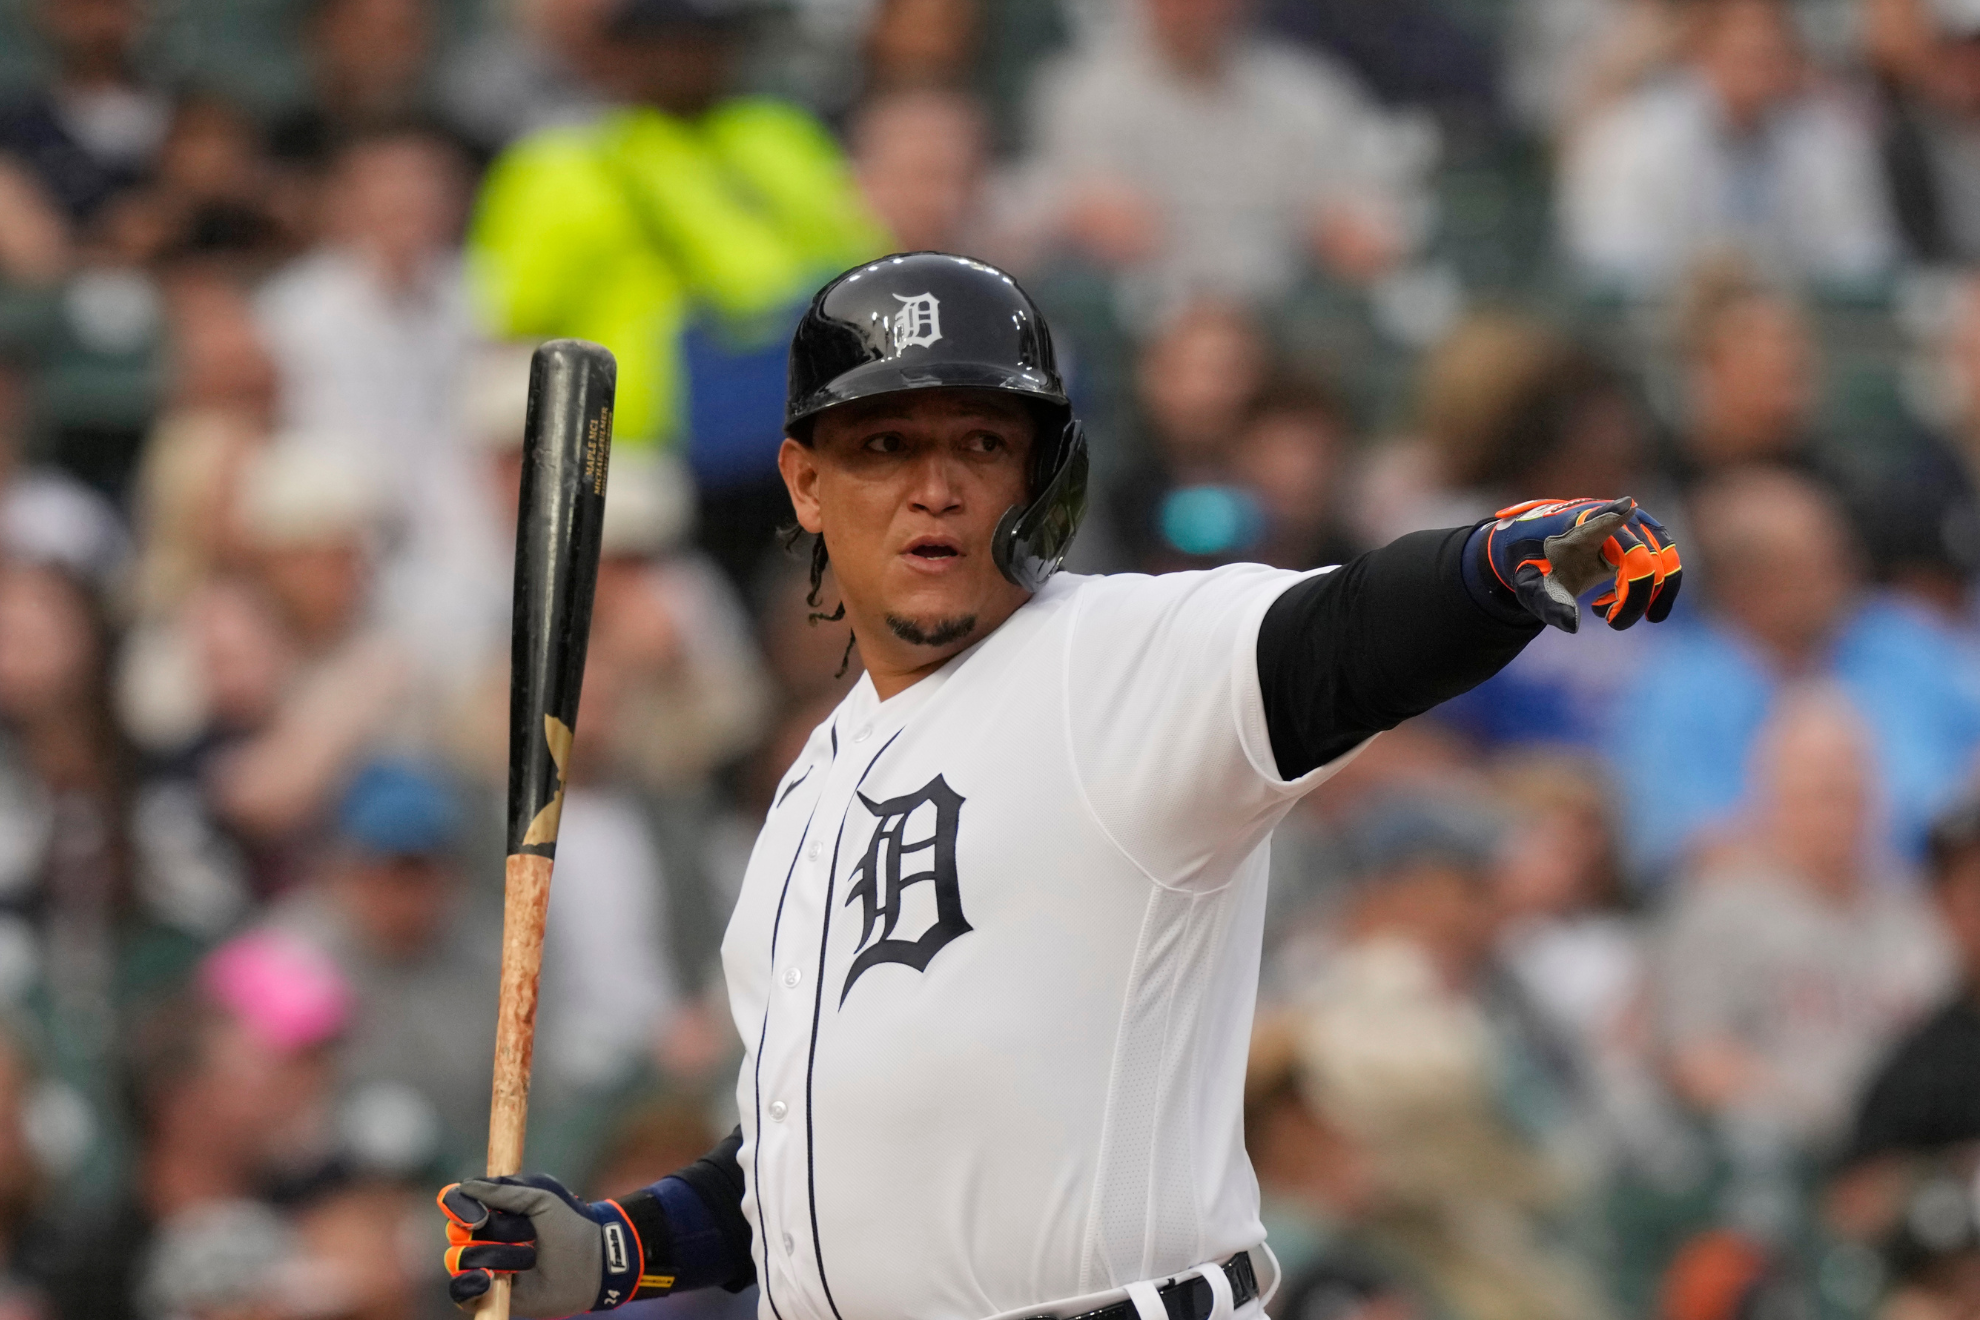 Miguel Cabrera is playing his final season in the major leagues.